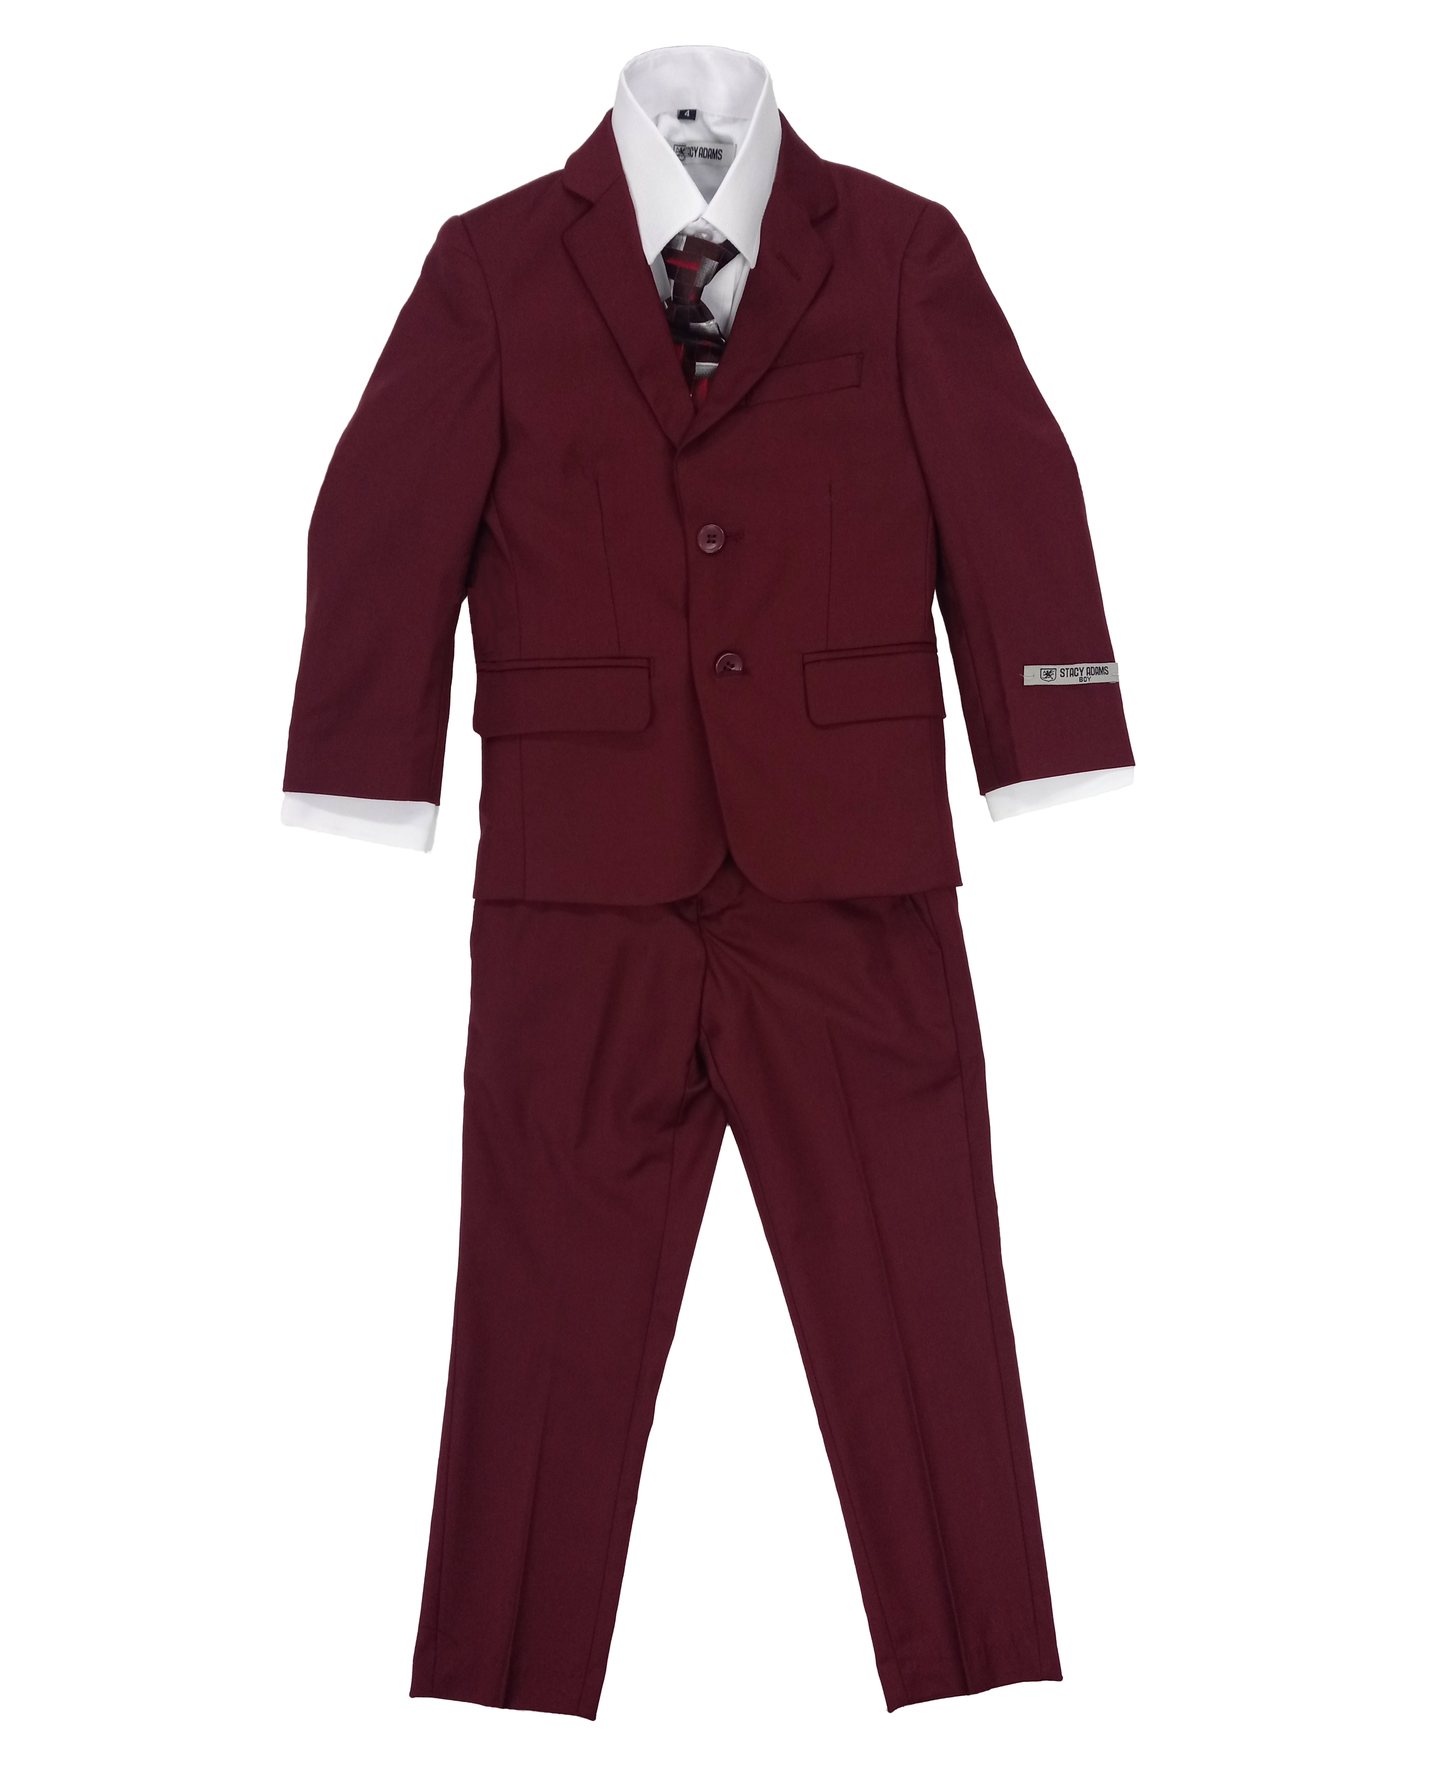 Stacy Adams Burgundy 5 pc Suits